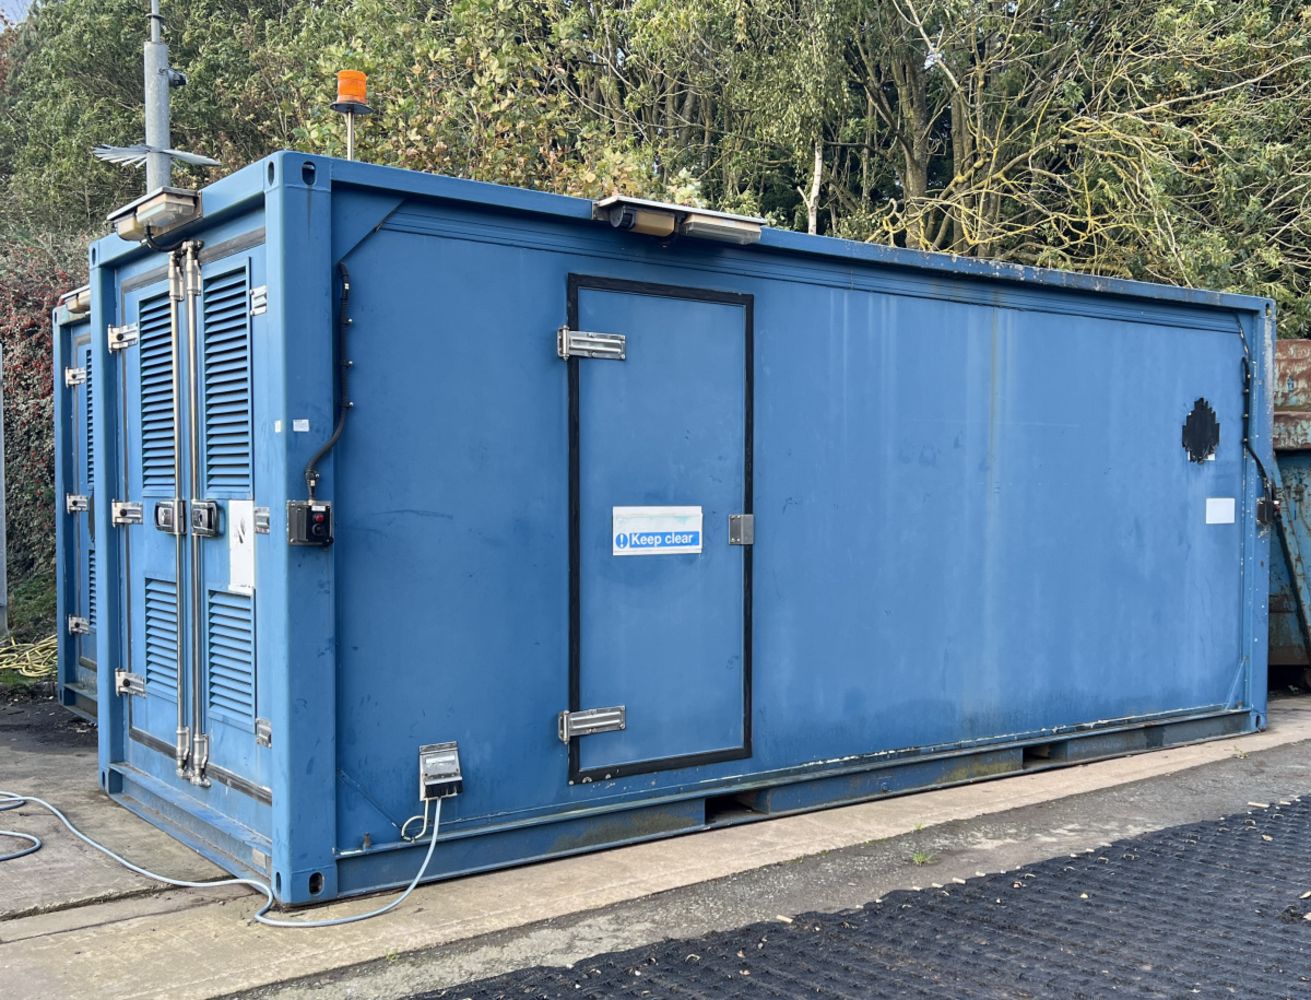 Online auction of 20ft refrigerated insulated containers with Zanotti Uniblock refrigeration - can be used as chiller or freezer